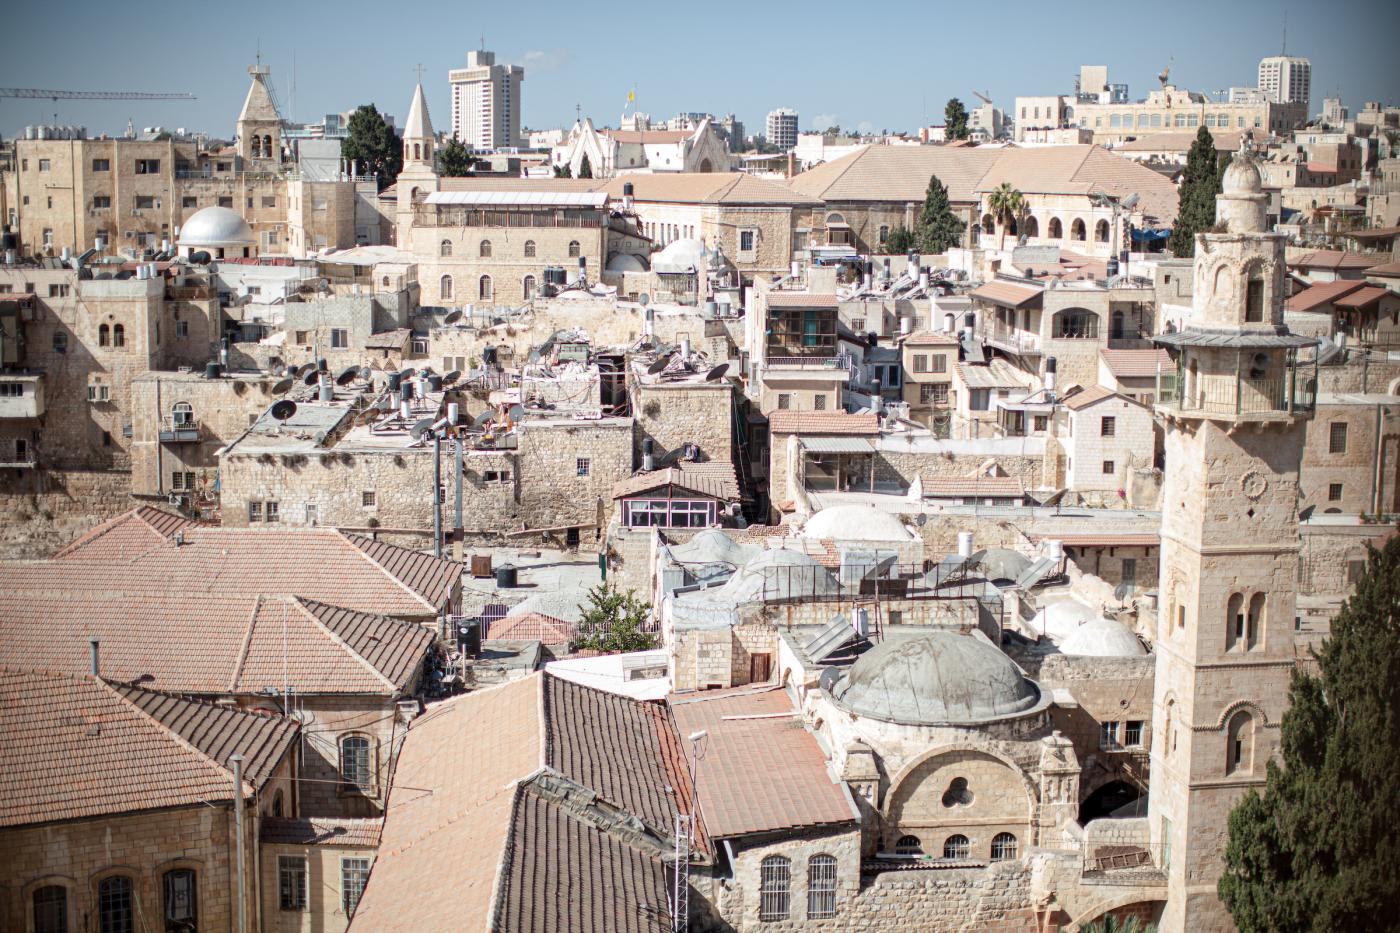 Roofs of the Old City of Jerusalem taken from the spire at the Church of The Redeemer.